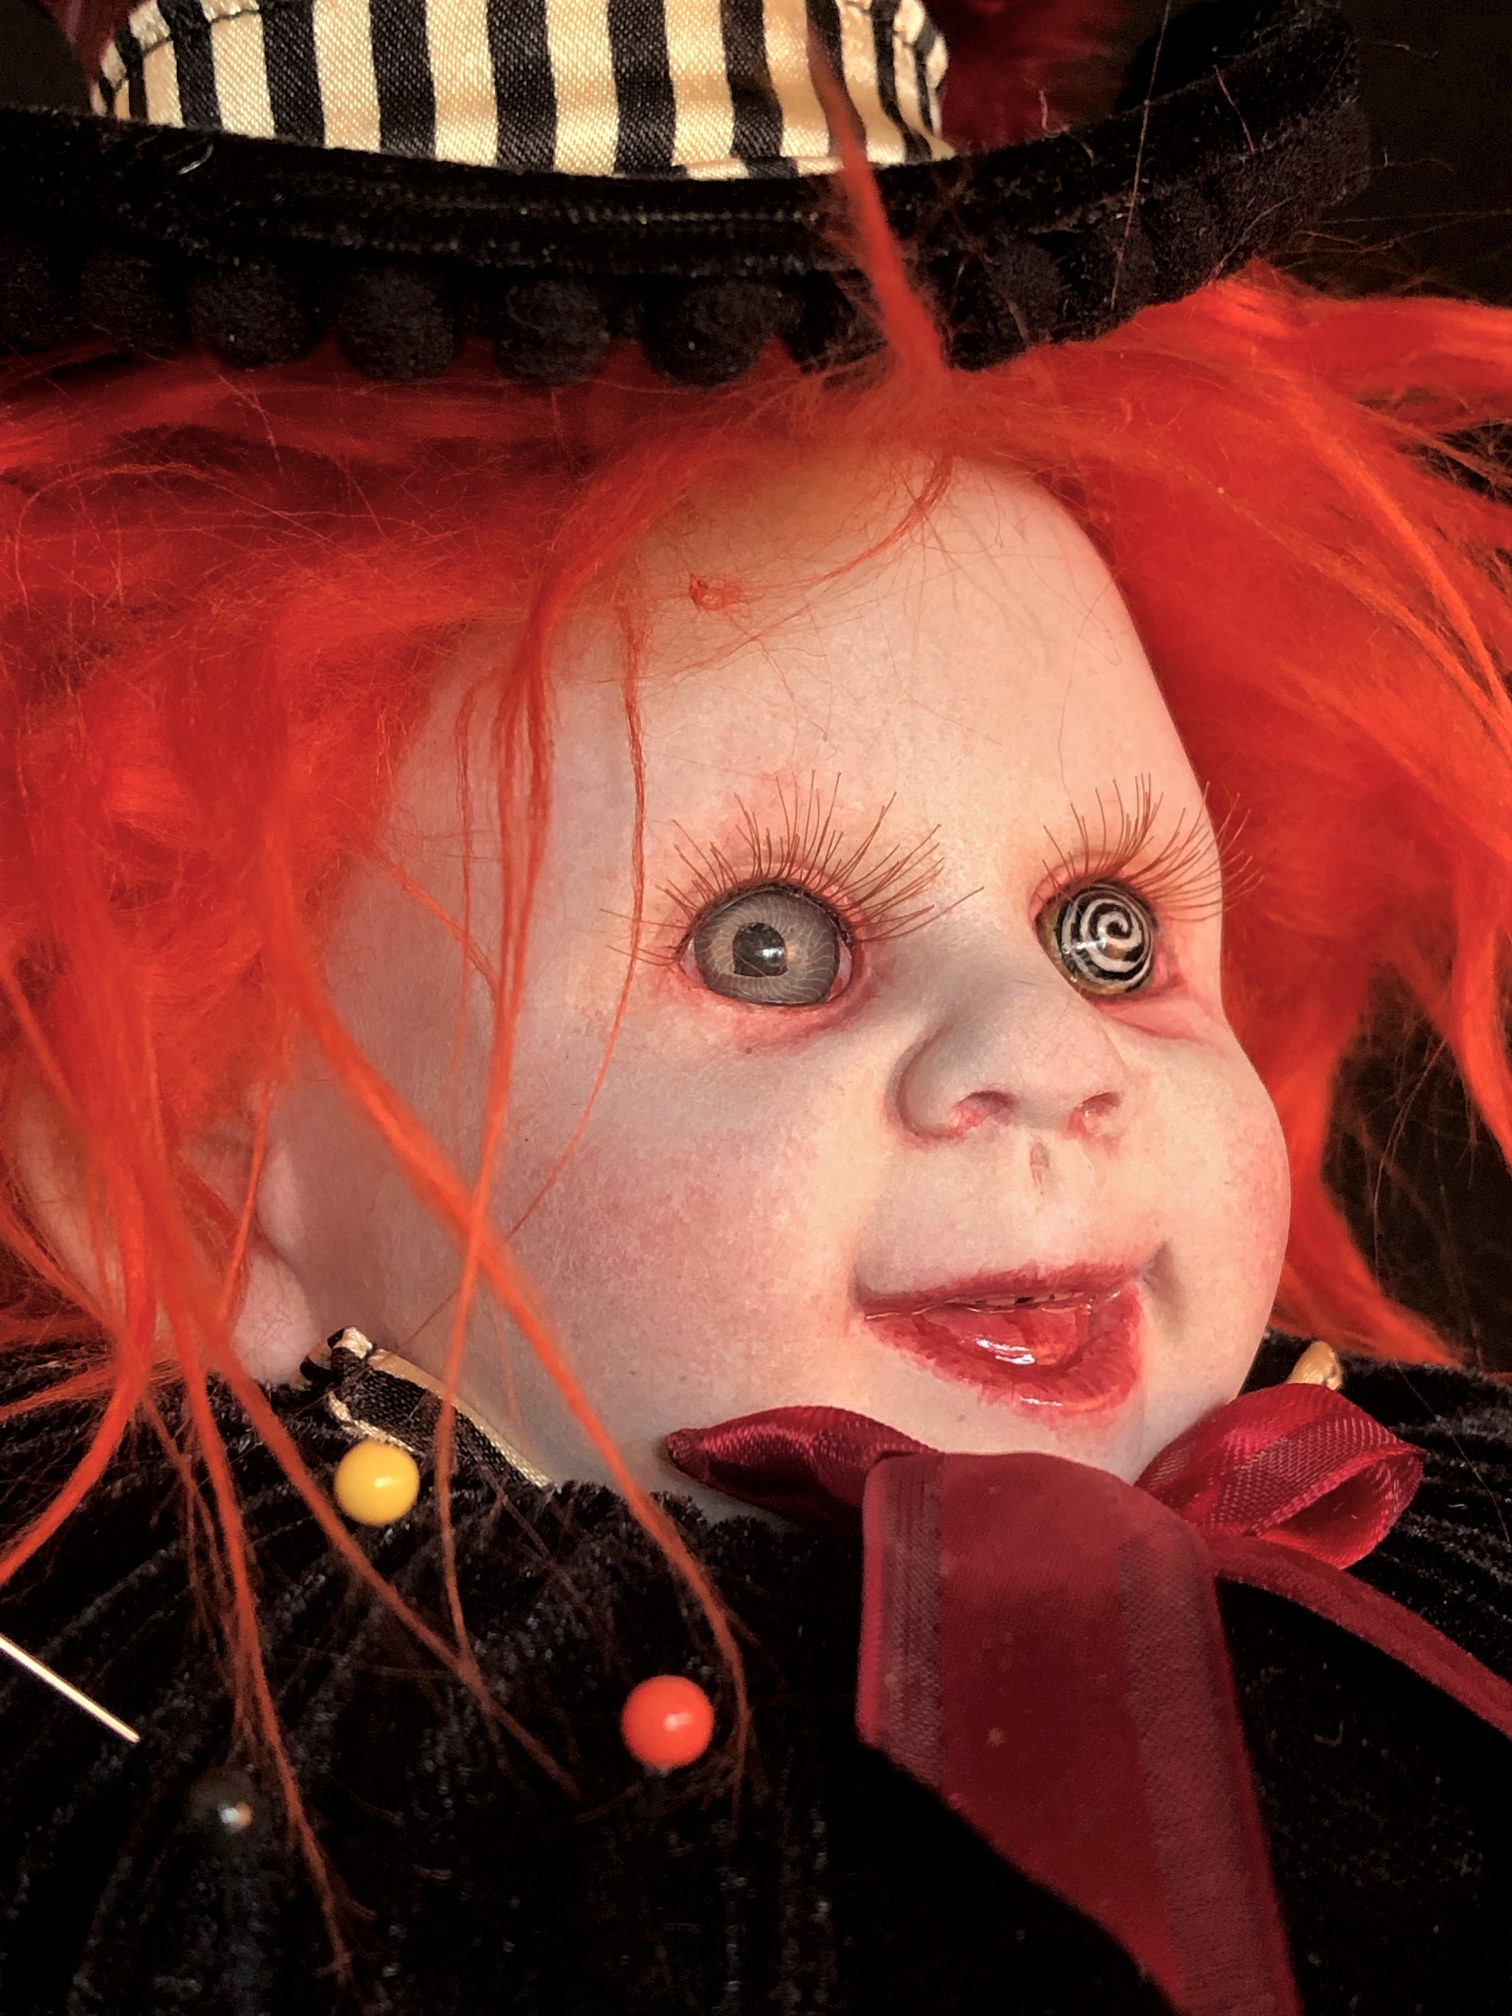 mad hatter themed pincushion porcelain doll head crazy eyes with bright orange hair and velvet tophat stuck with pins